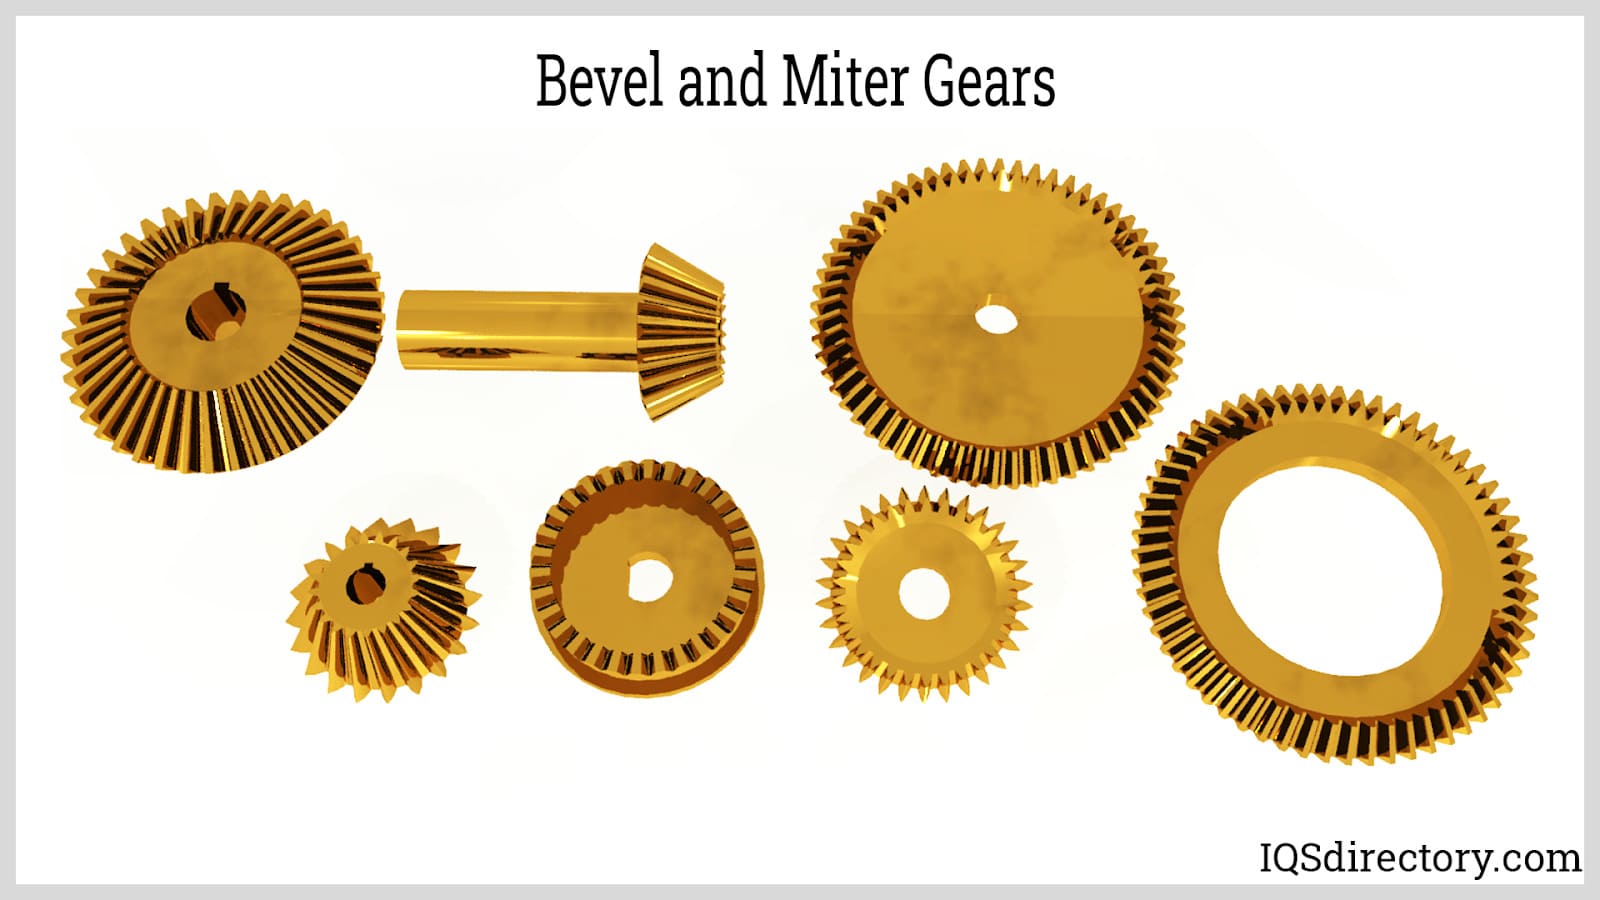 How Gears Work - Different Types of Gears, their Functions